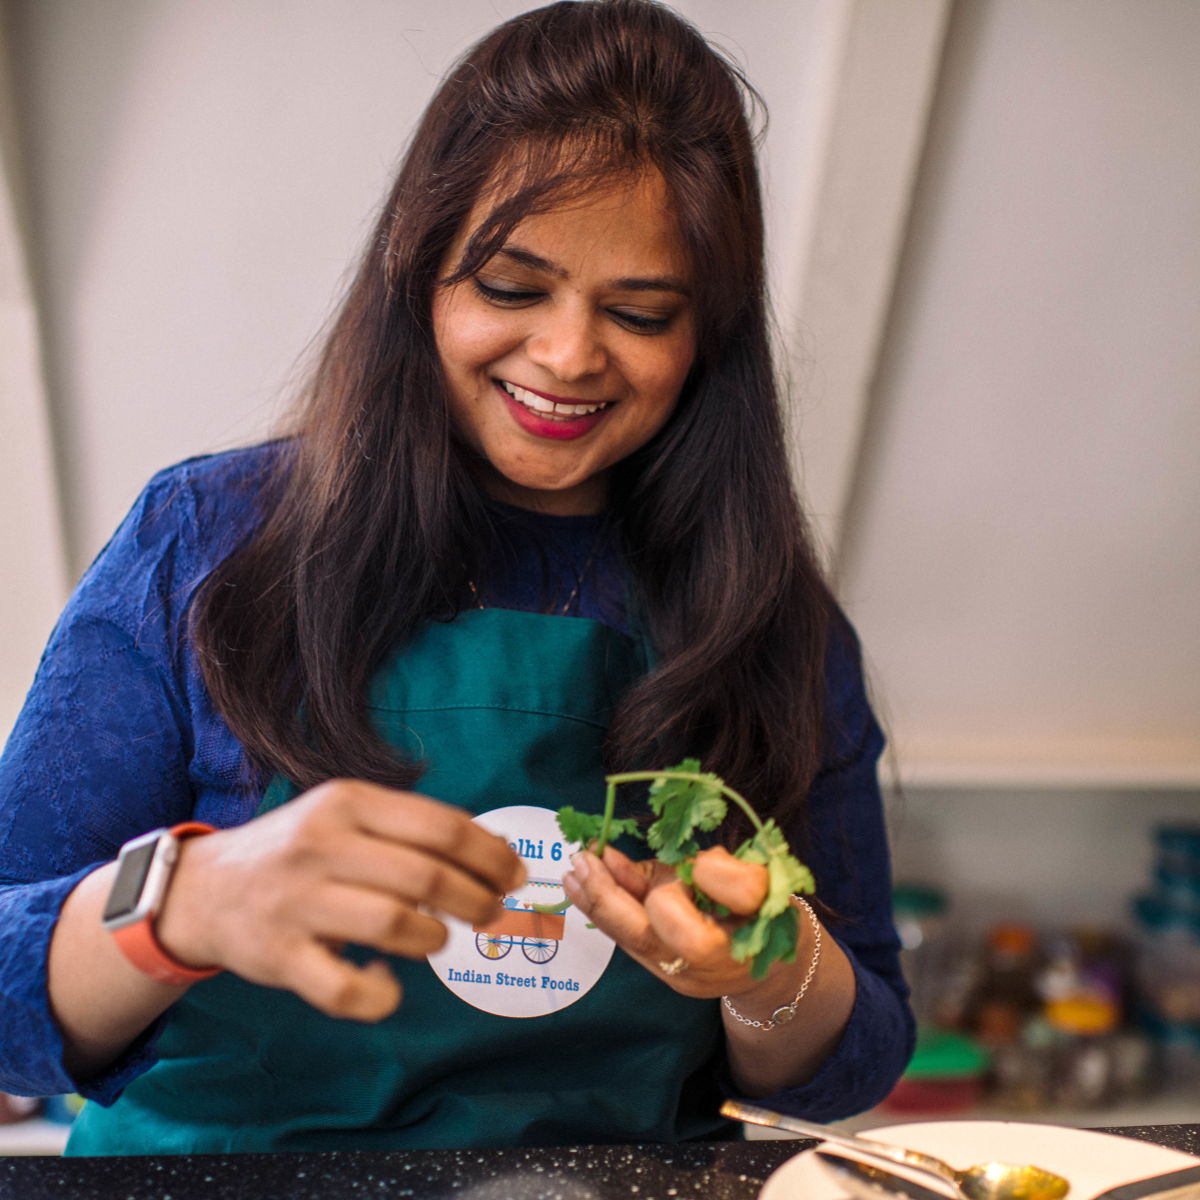 Experience vegan cooking workshop with fun